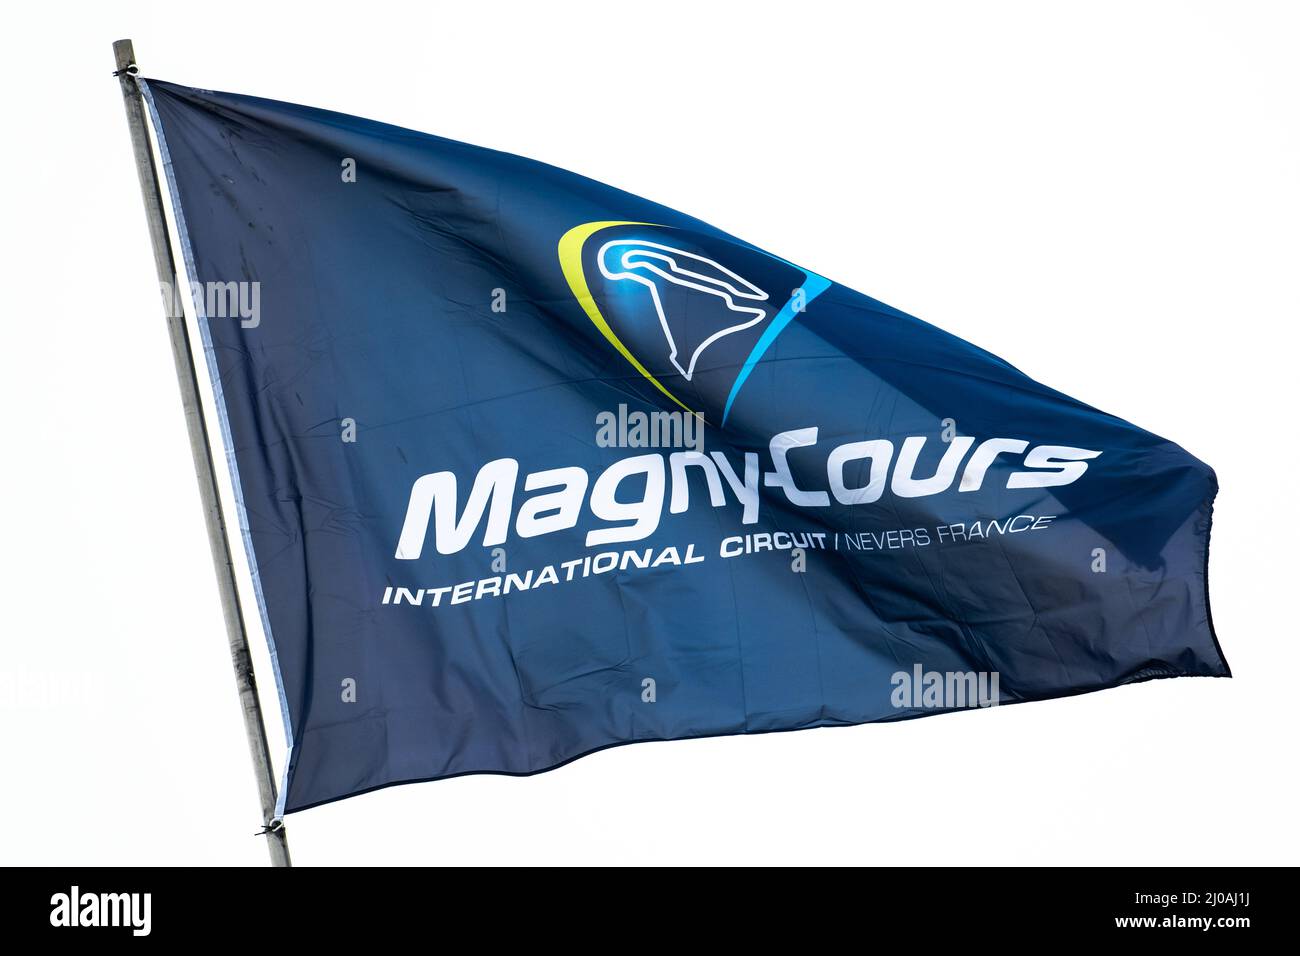 Magny Cours, France. 16th Mar, 2022. The words 'Magny-Cours International Circuit/Nevers France' can be seen on a flag waving in the wind on the main grandstand. Credit: Silas Stein/dpa/Alamy Live News Stock Photo